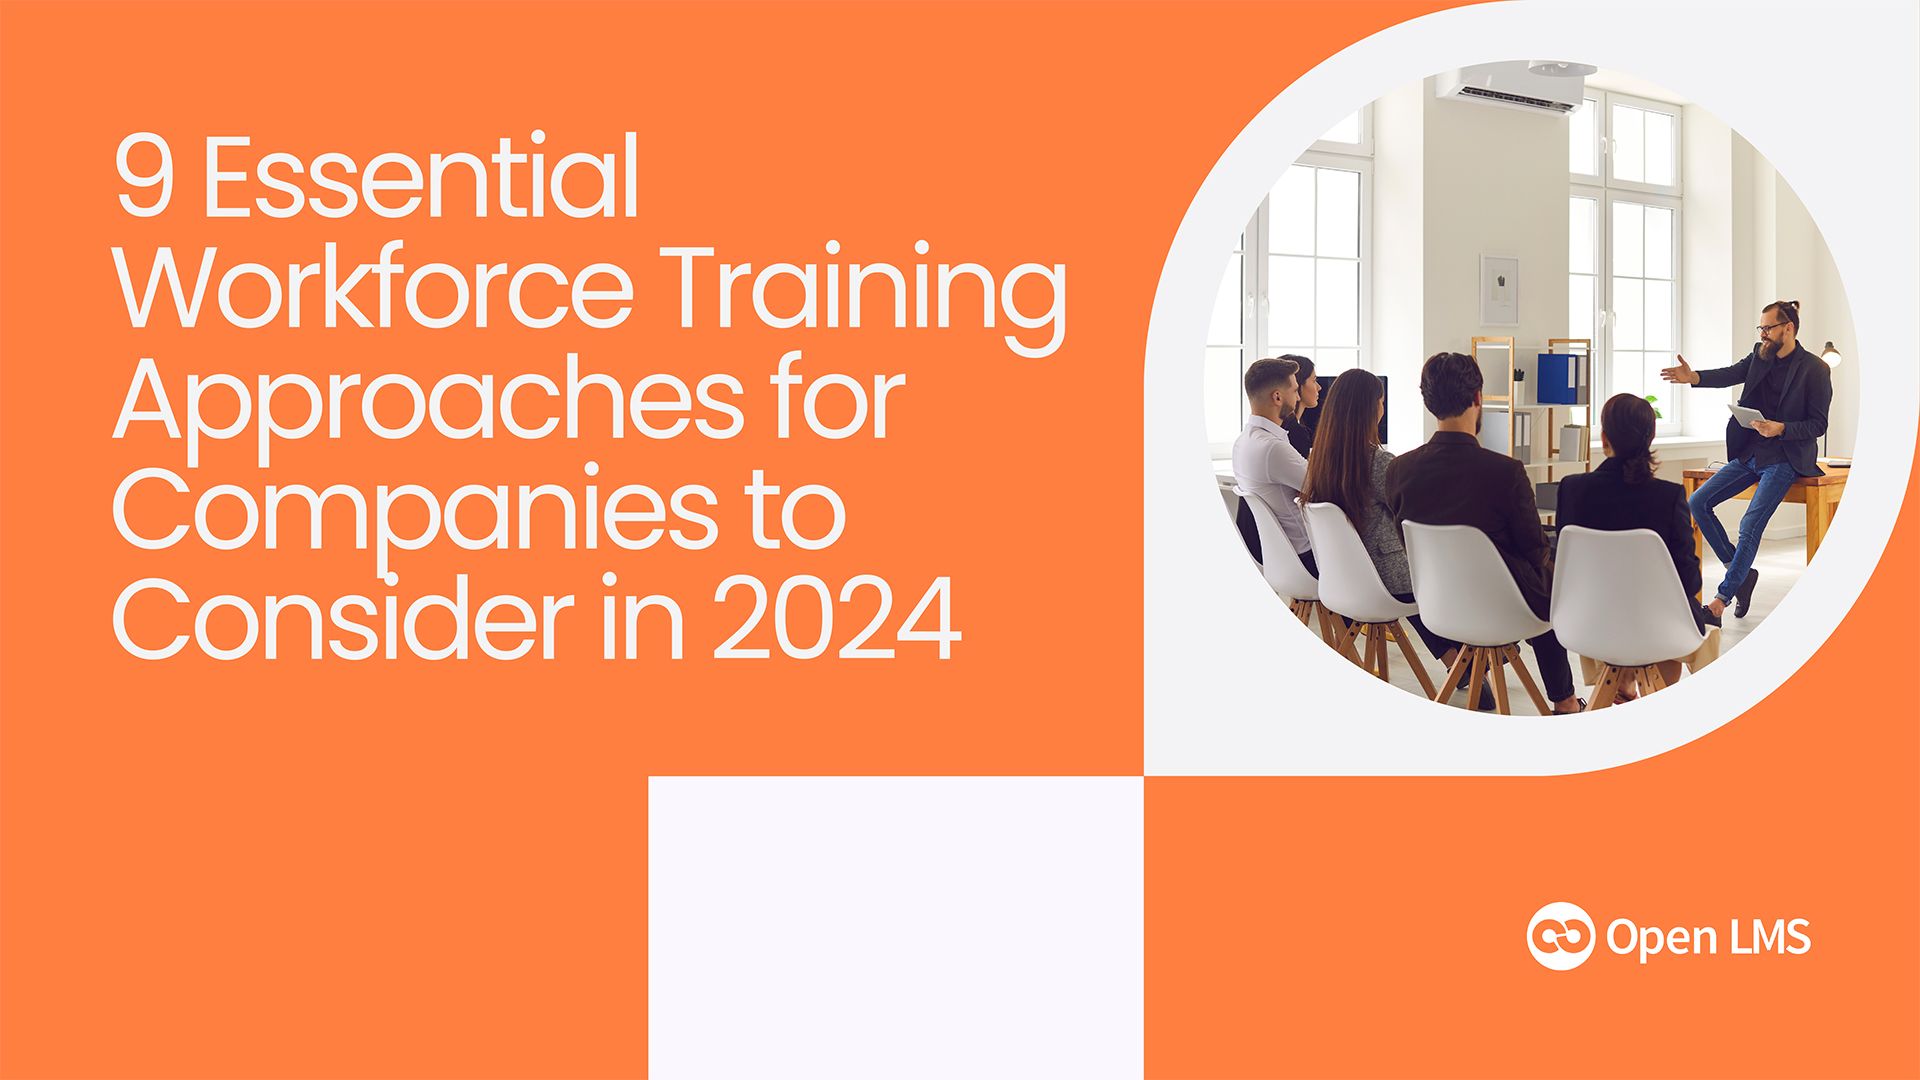 9 Essential Workforce Training Approaches for Companies to Consider in 2024